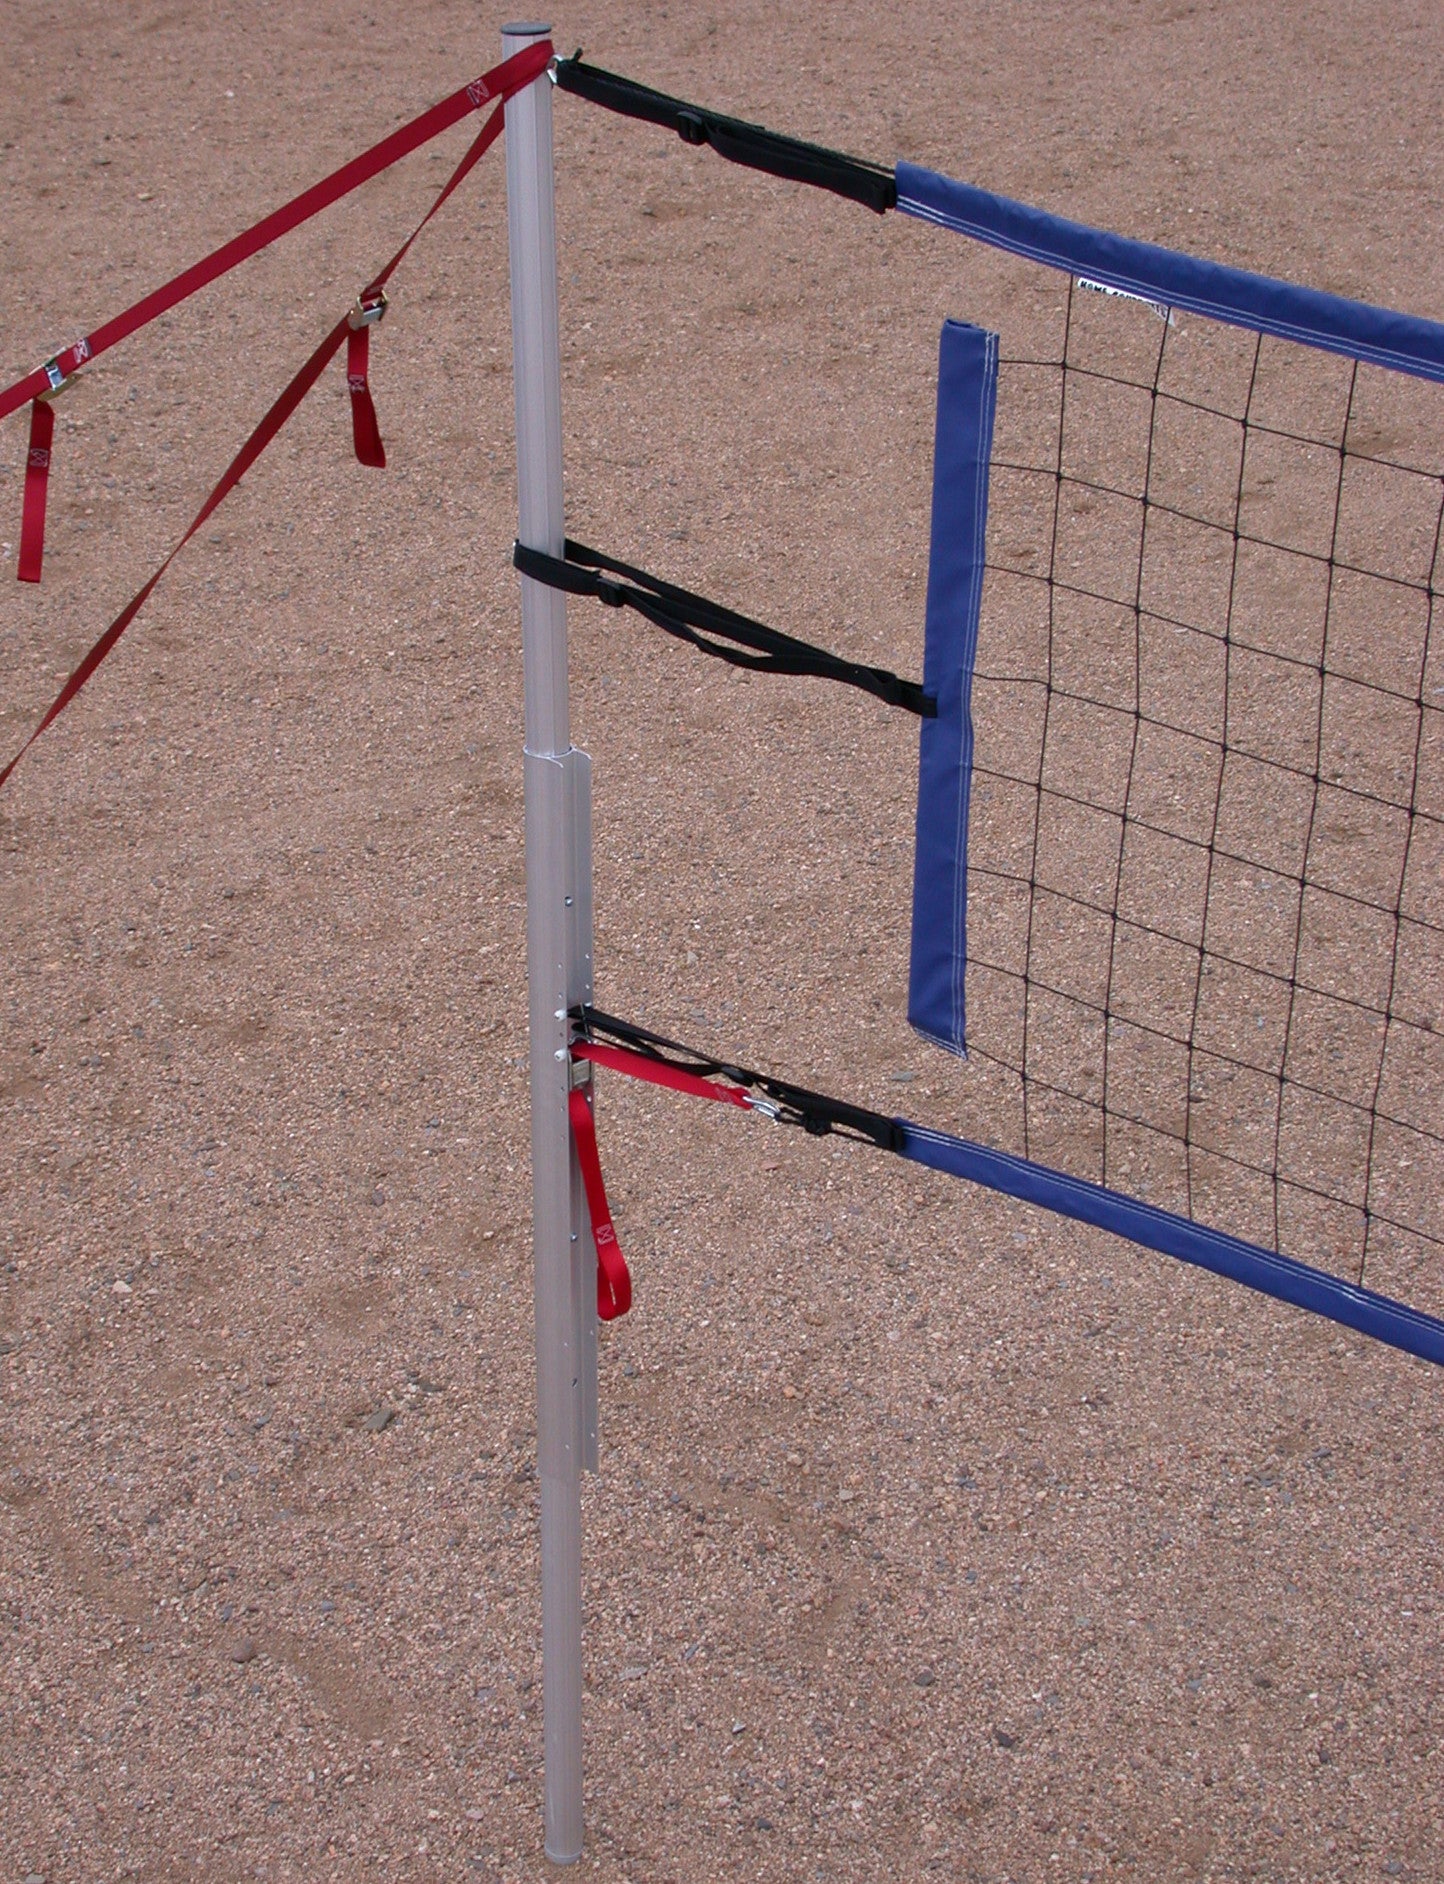 201-PNRB17-Power Net Portable Volleyball Set, poles, blue net, guy lines, web boundary, stakes & carrying bag